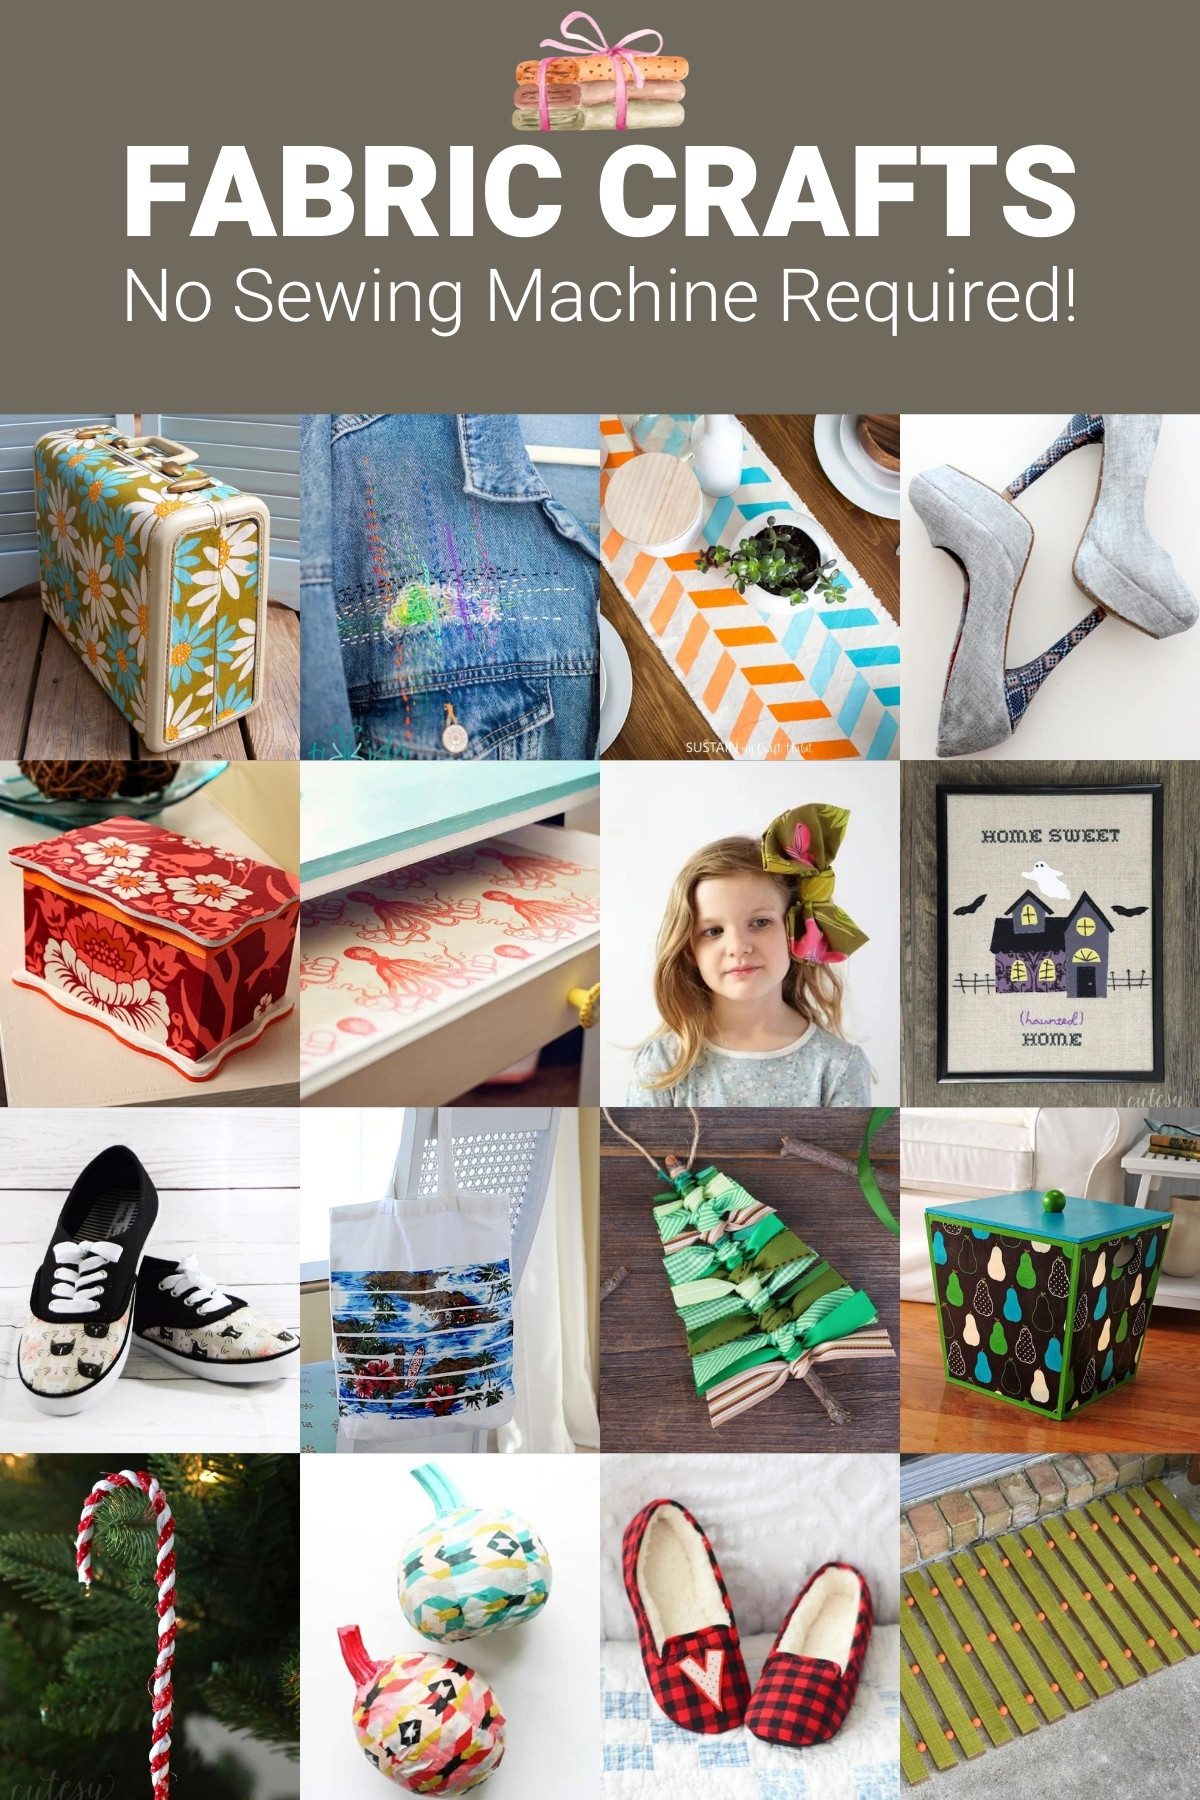 35+ Fabric Crafts that Don't Need a Sewing Machine! - DIY Candy